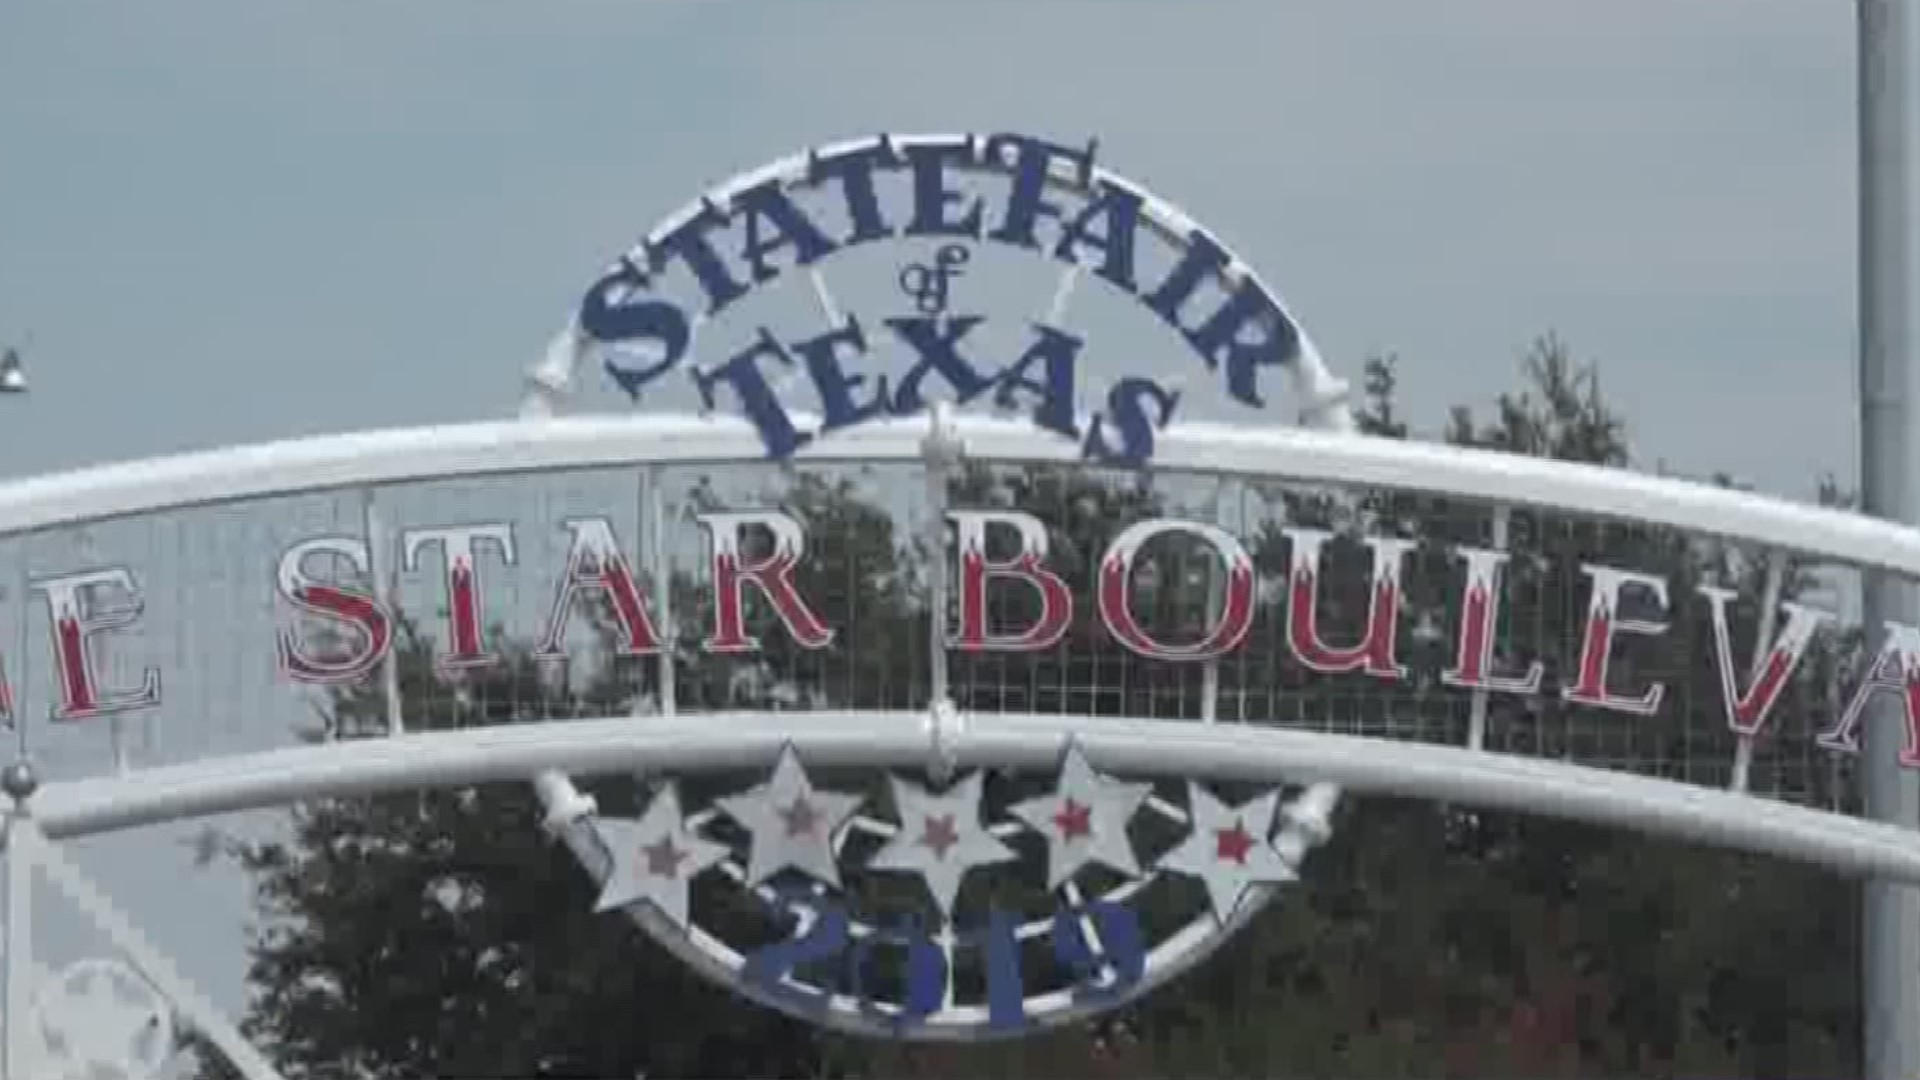 6 News has some tips on surviving one of the biggest fairs in the nation.